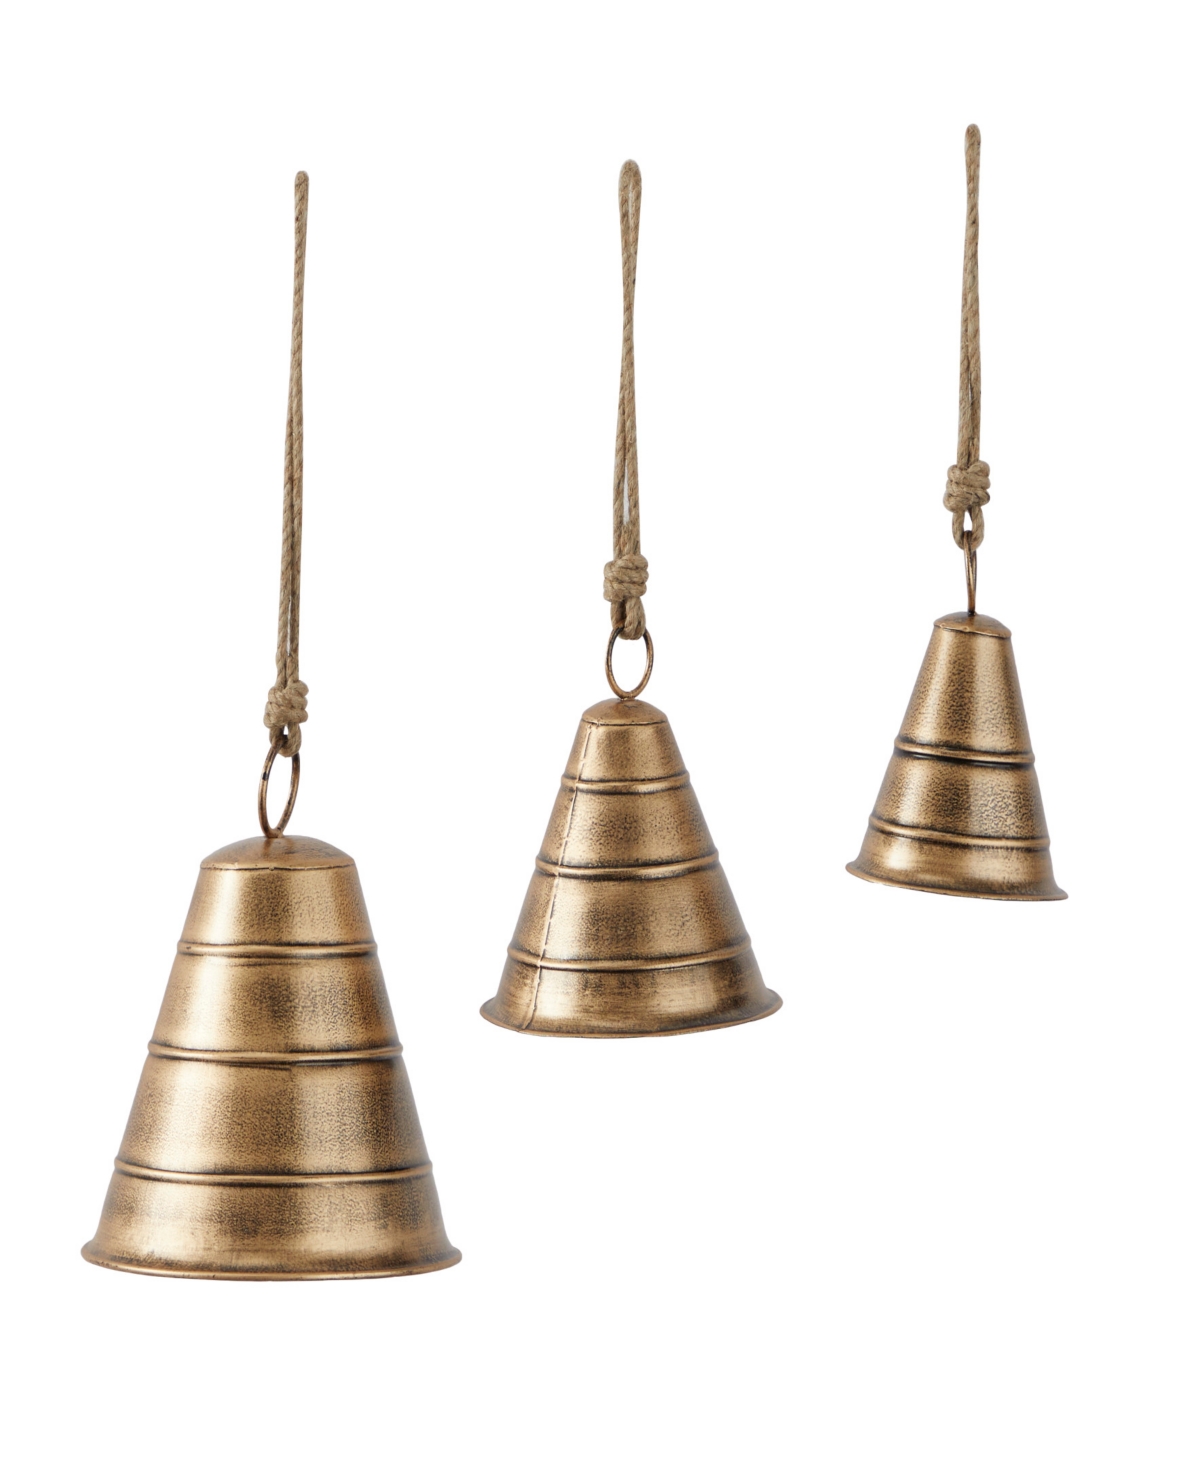 Rosemary Lane Black Metal Bohemian Decorative Cow Bell With Jute Hanging Rope Set 3 Pieces In Brass